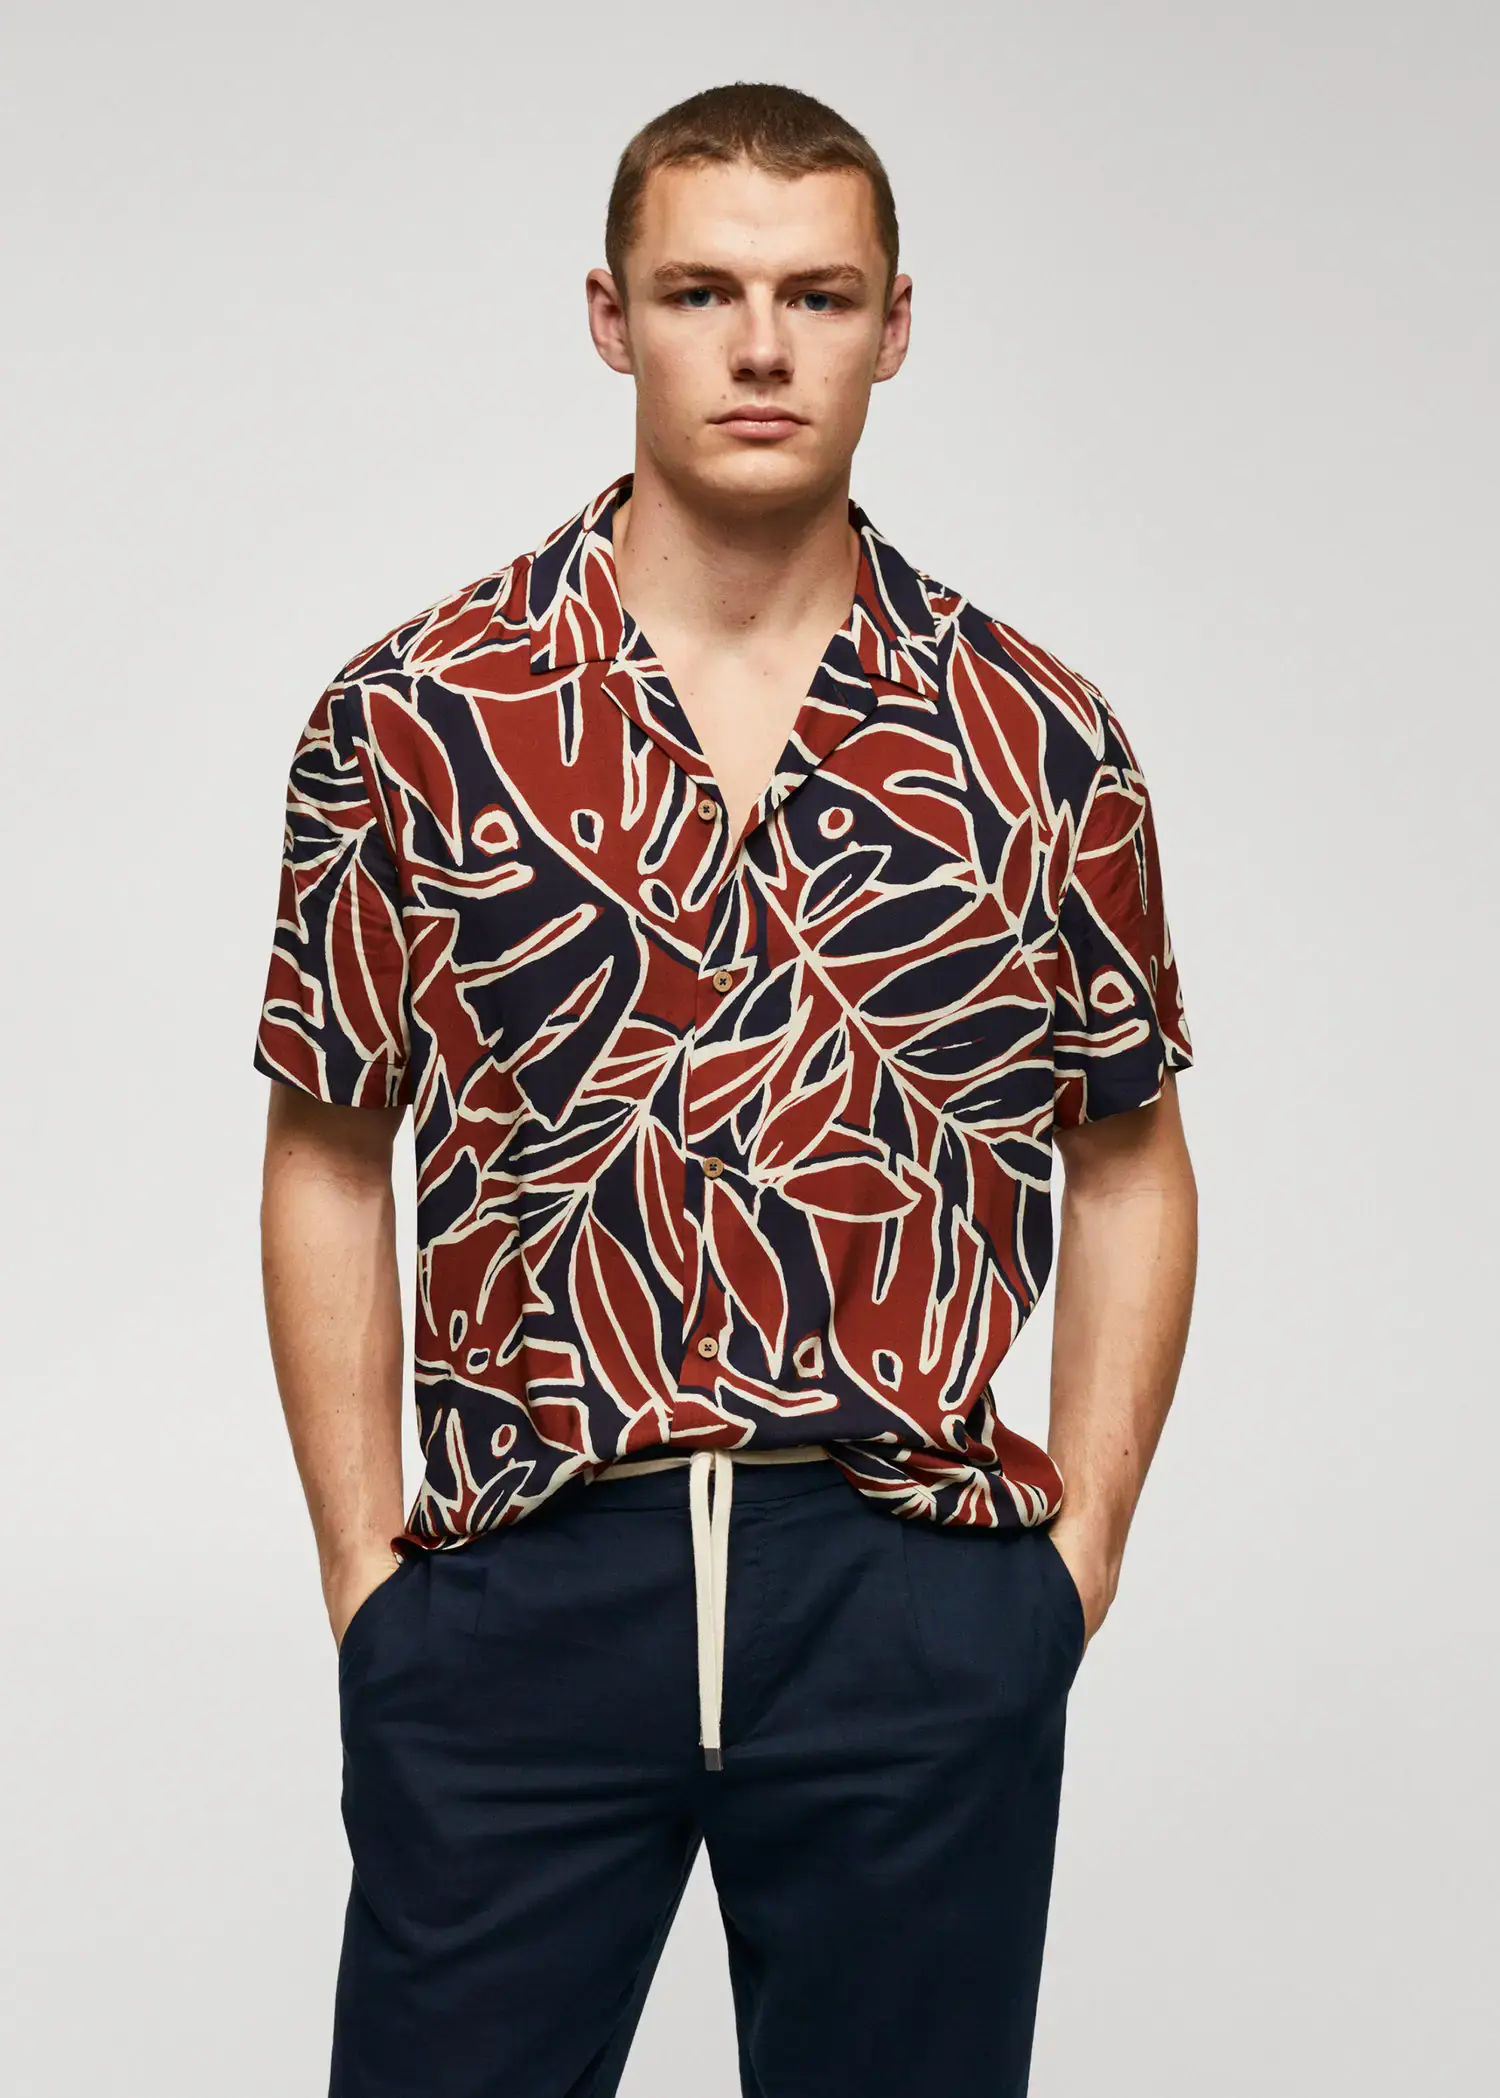 Mango Bowling shirt with leaf print. a man in a red and black shirt is holding his hands in his pockets. 